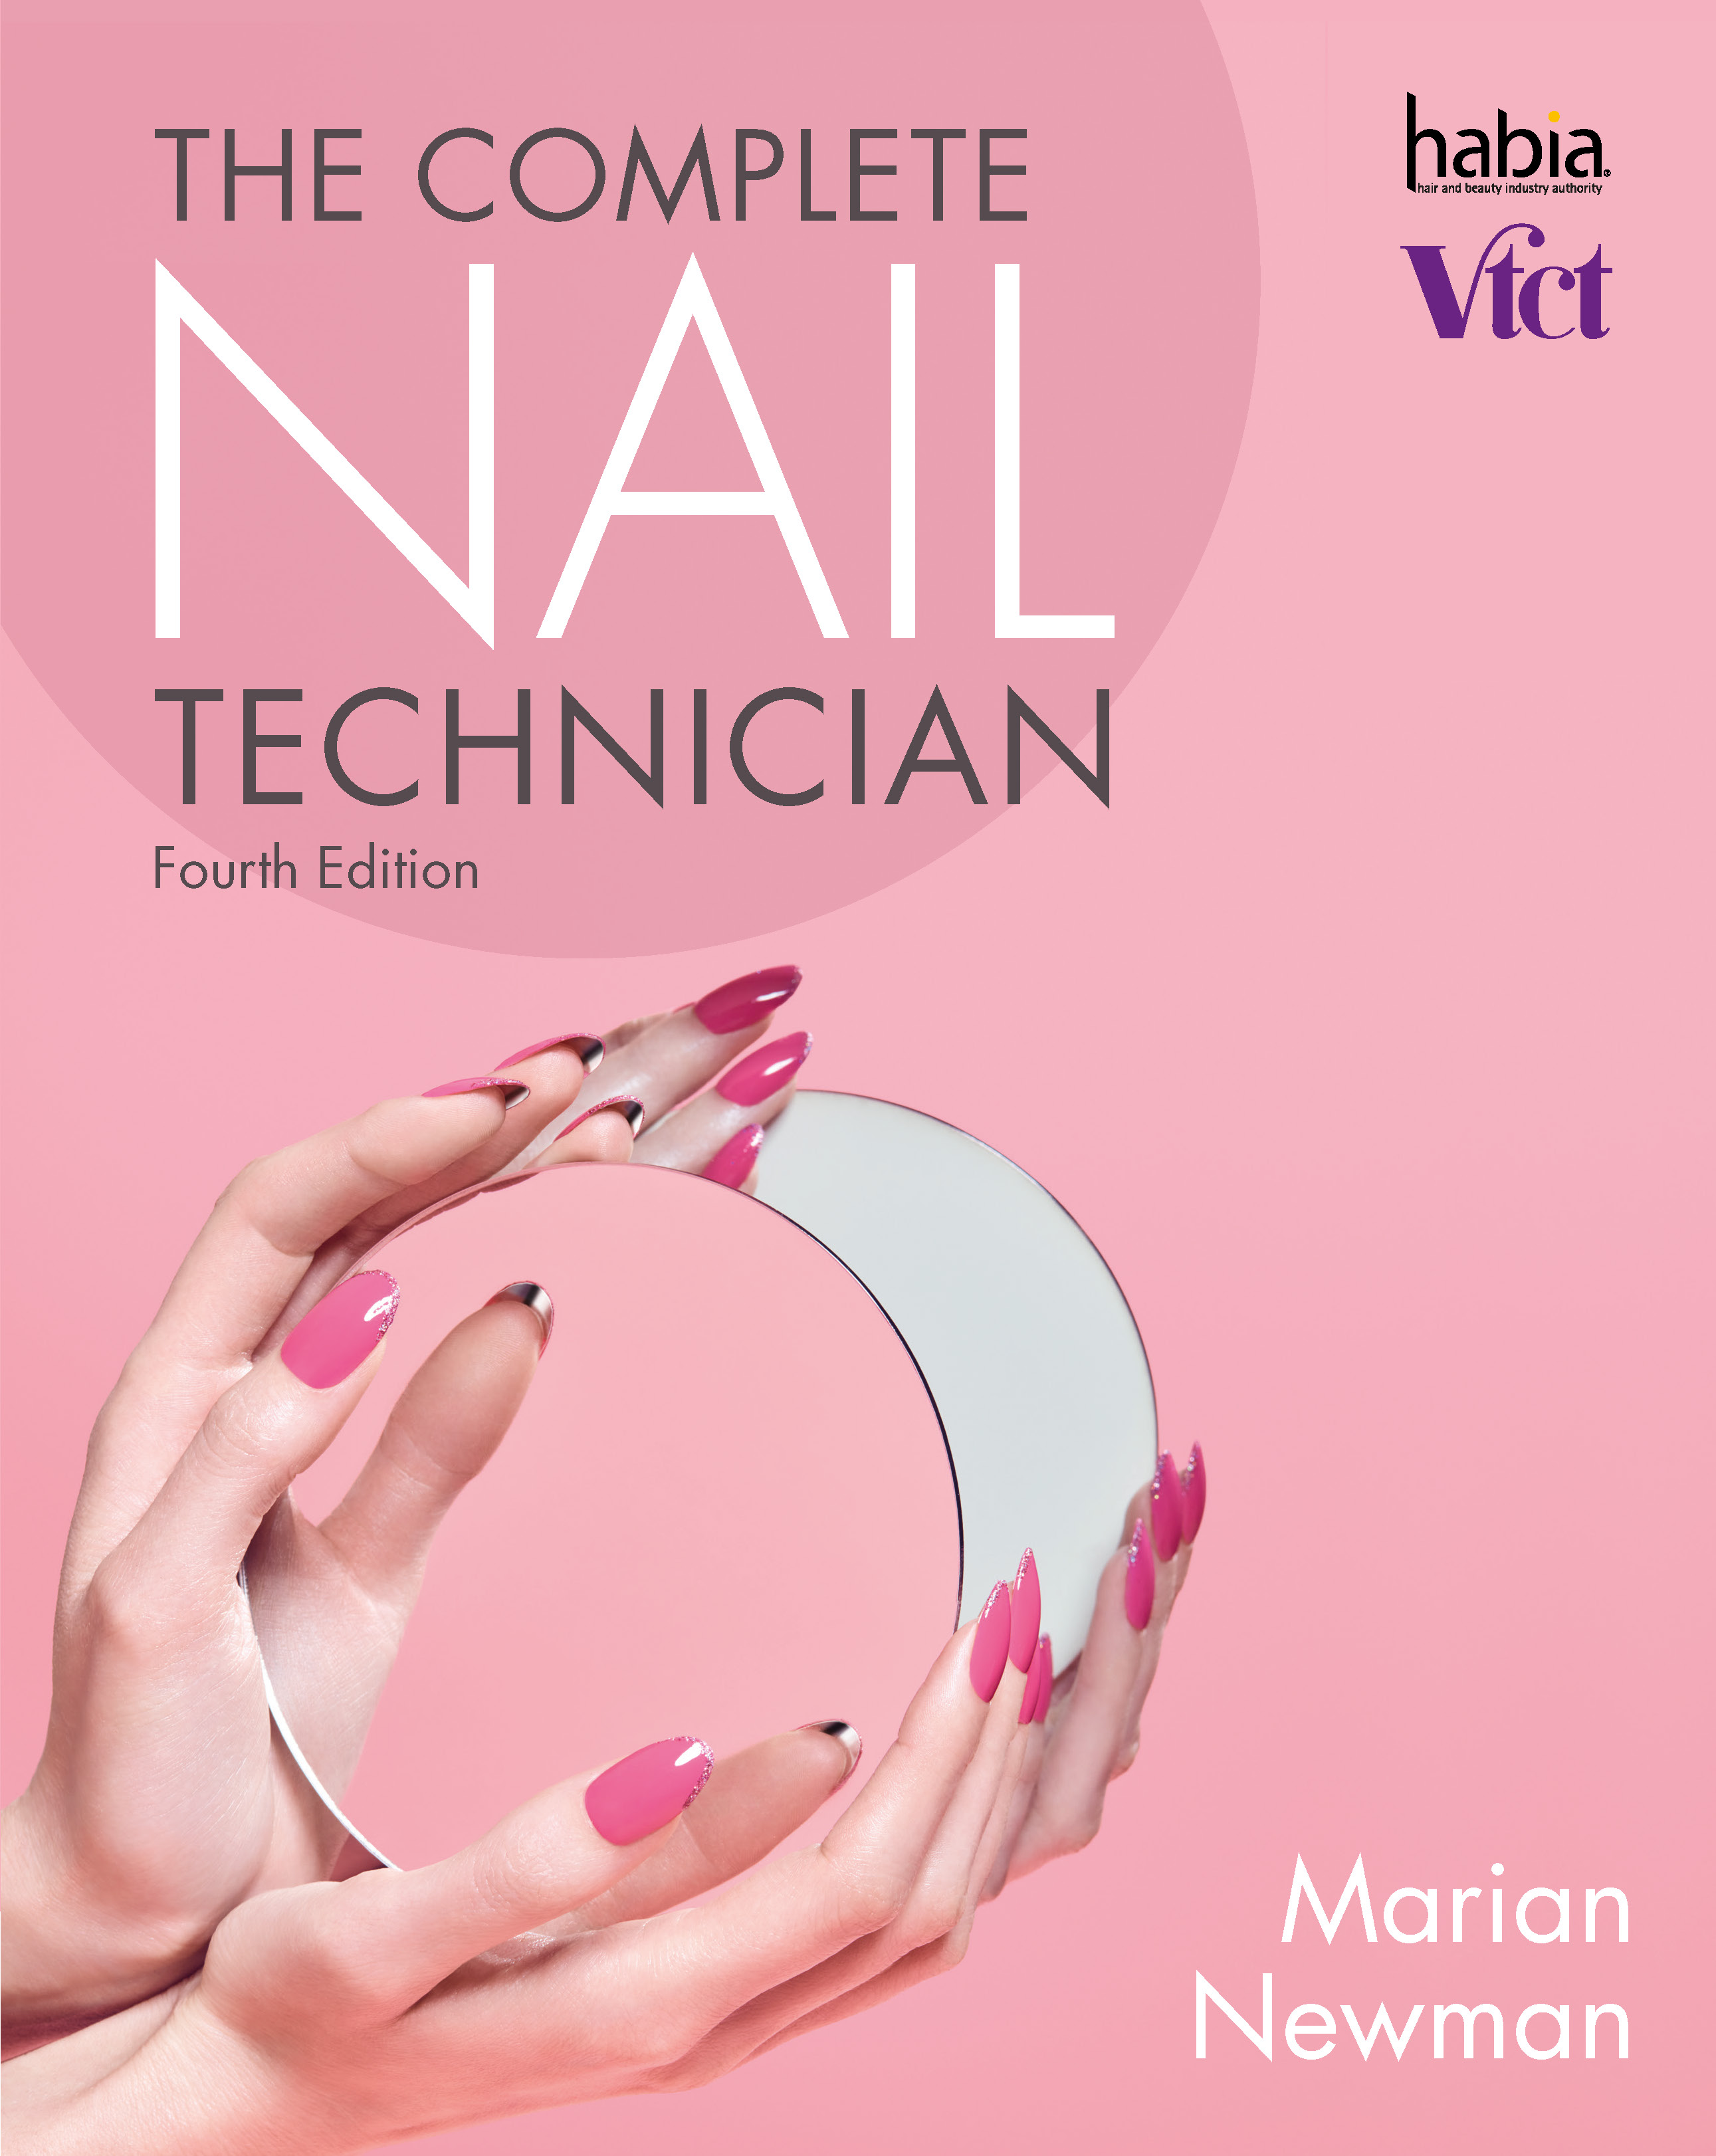 The Complete Nail Technician 4th edition by Marian Newman